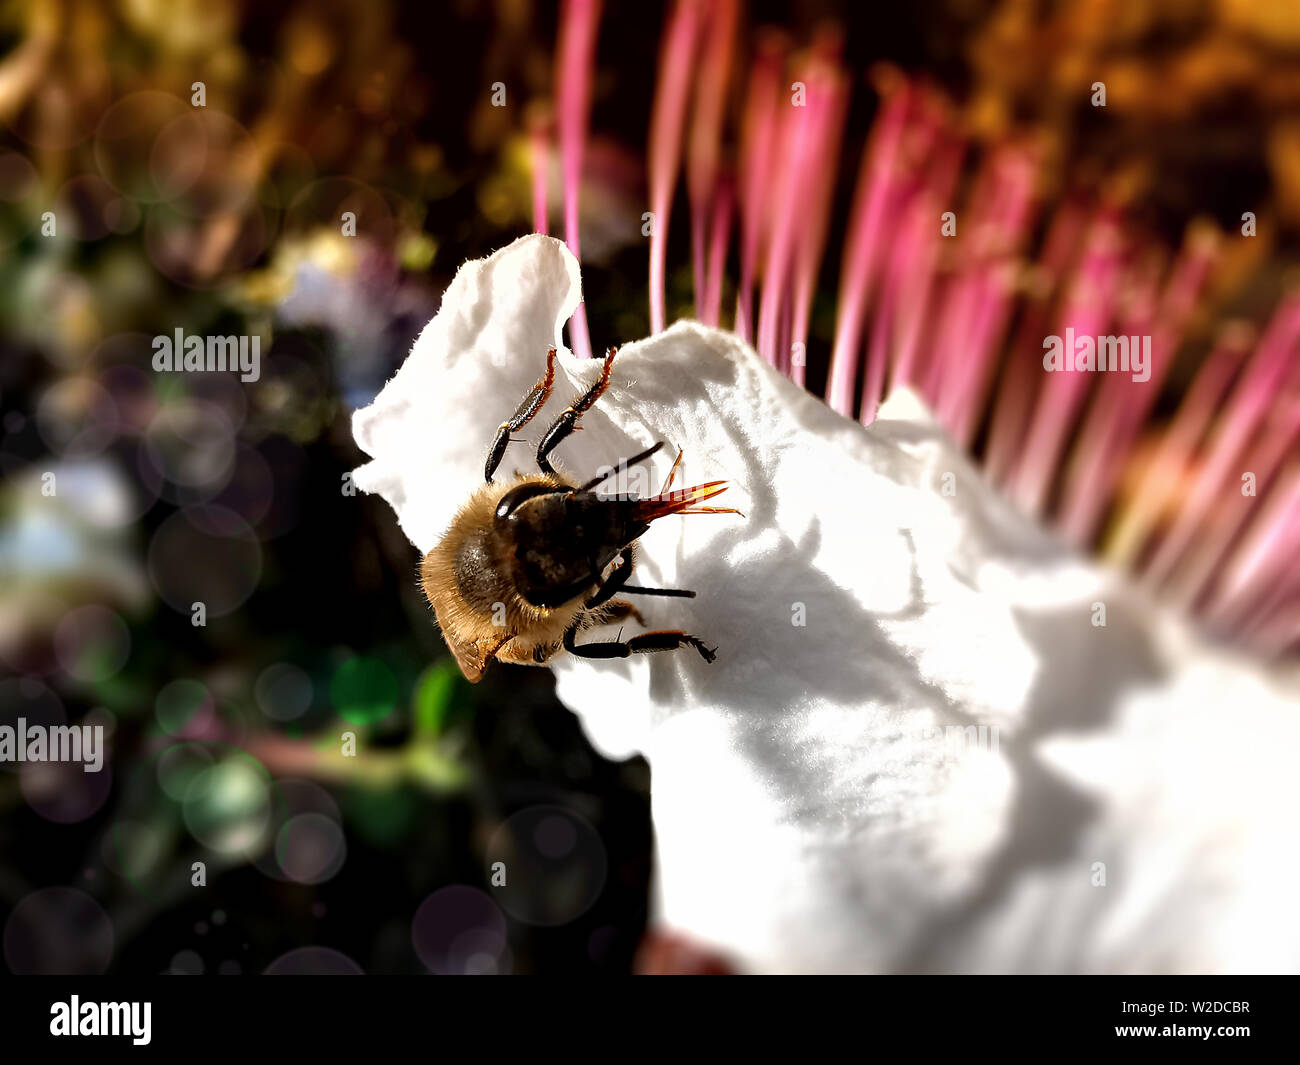 Macro shot of a bee on a white flower. Stock Photo